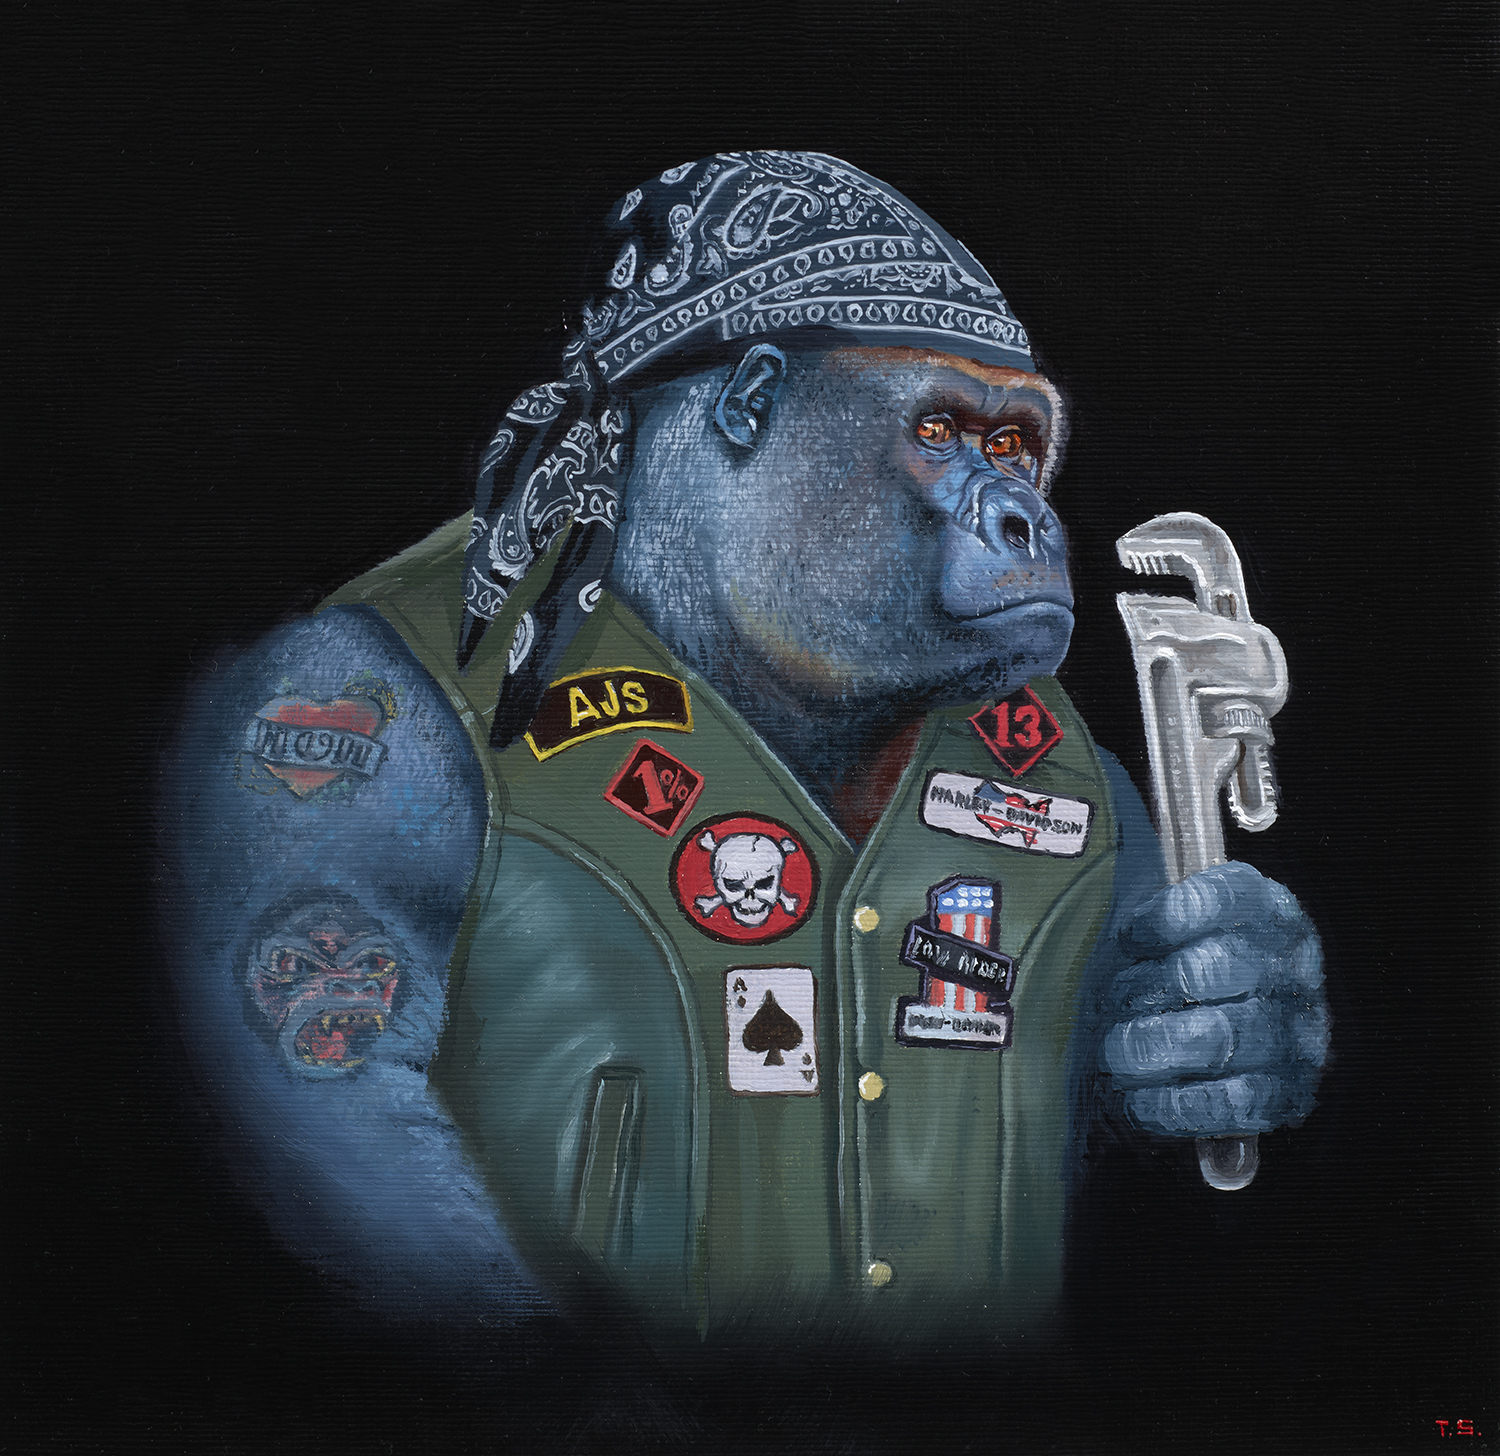 A gorilla in a denim vest holding a wrench - Tony South - Monkey Got Wrench